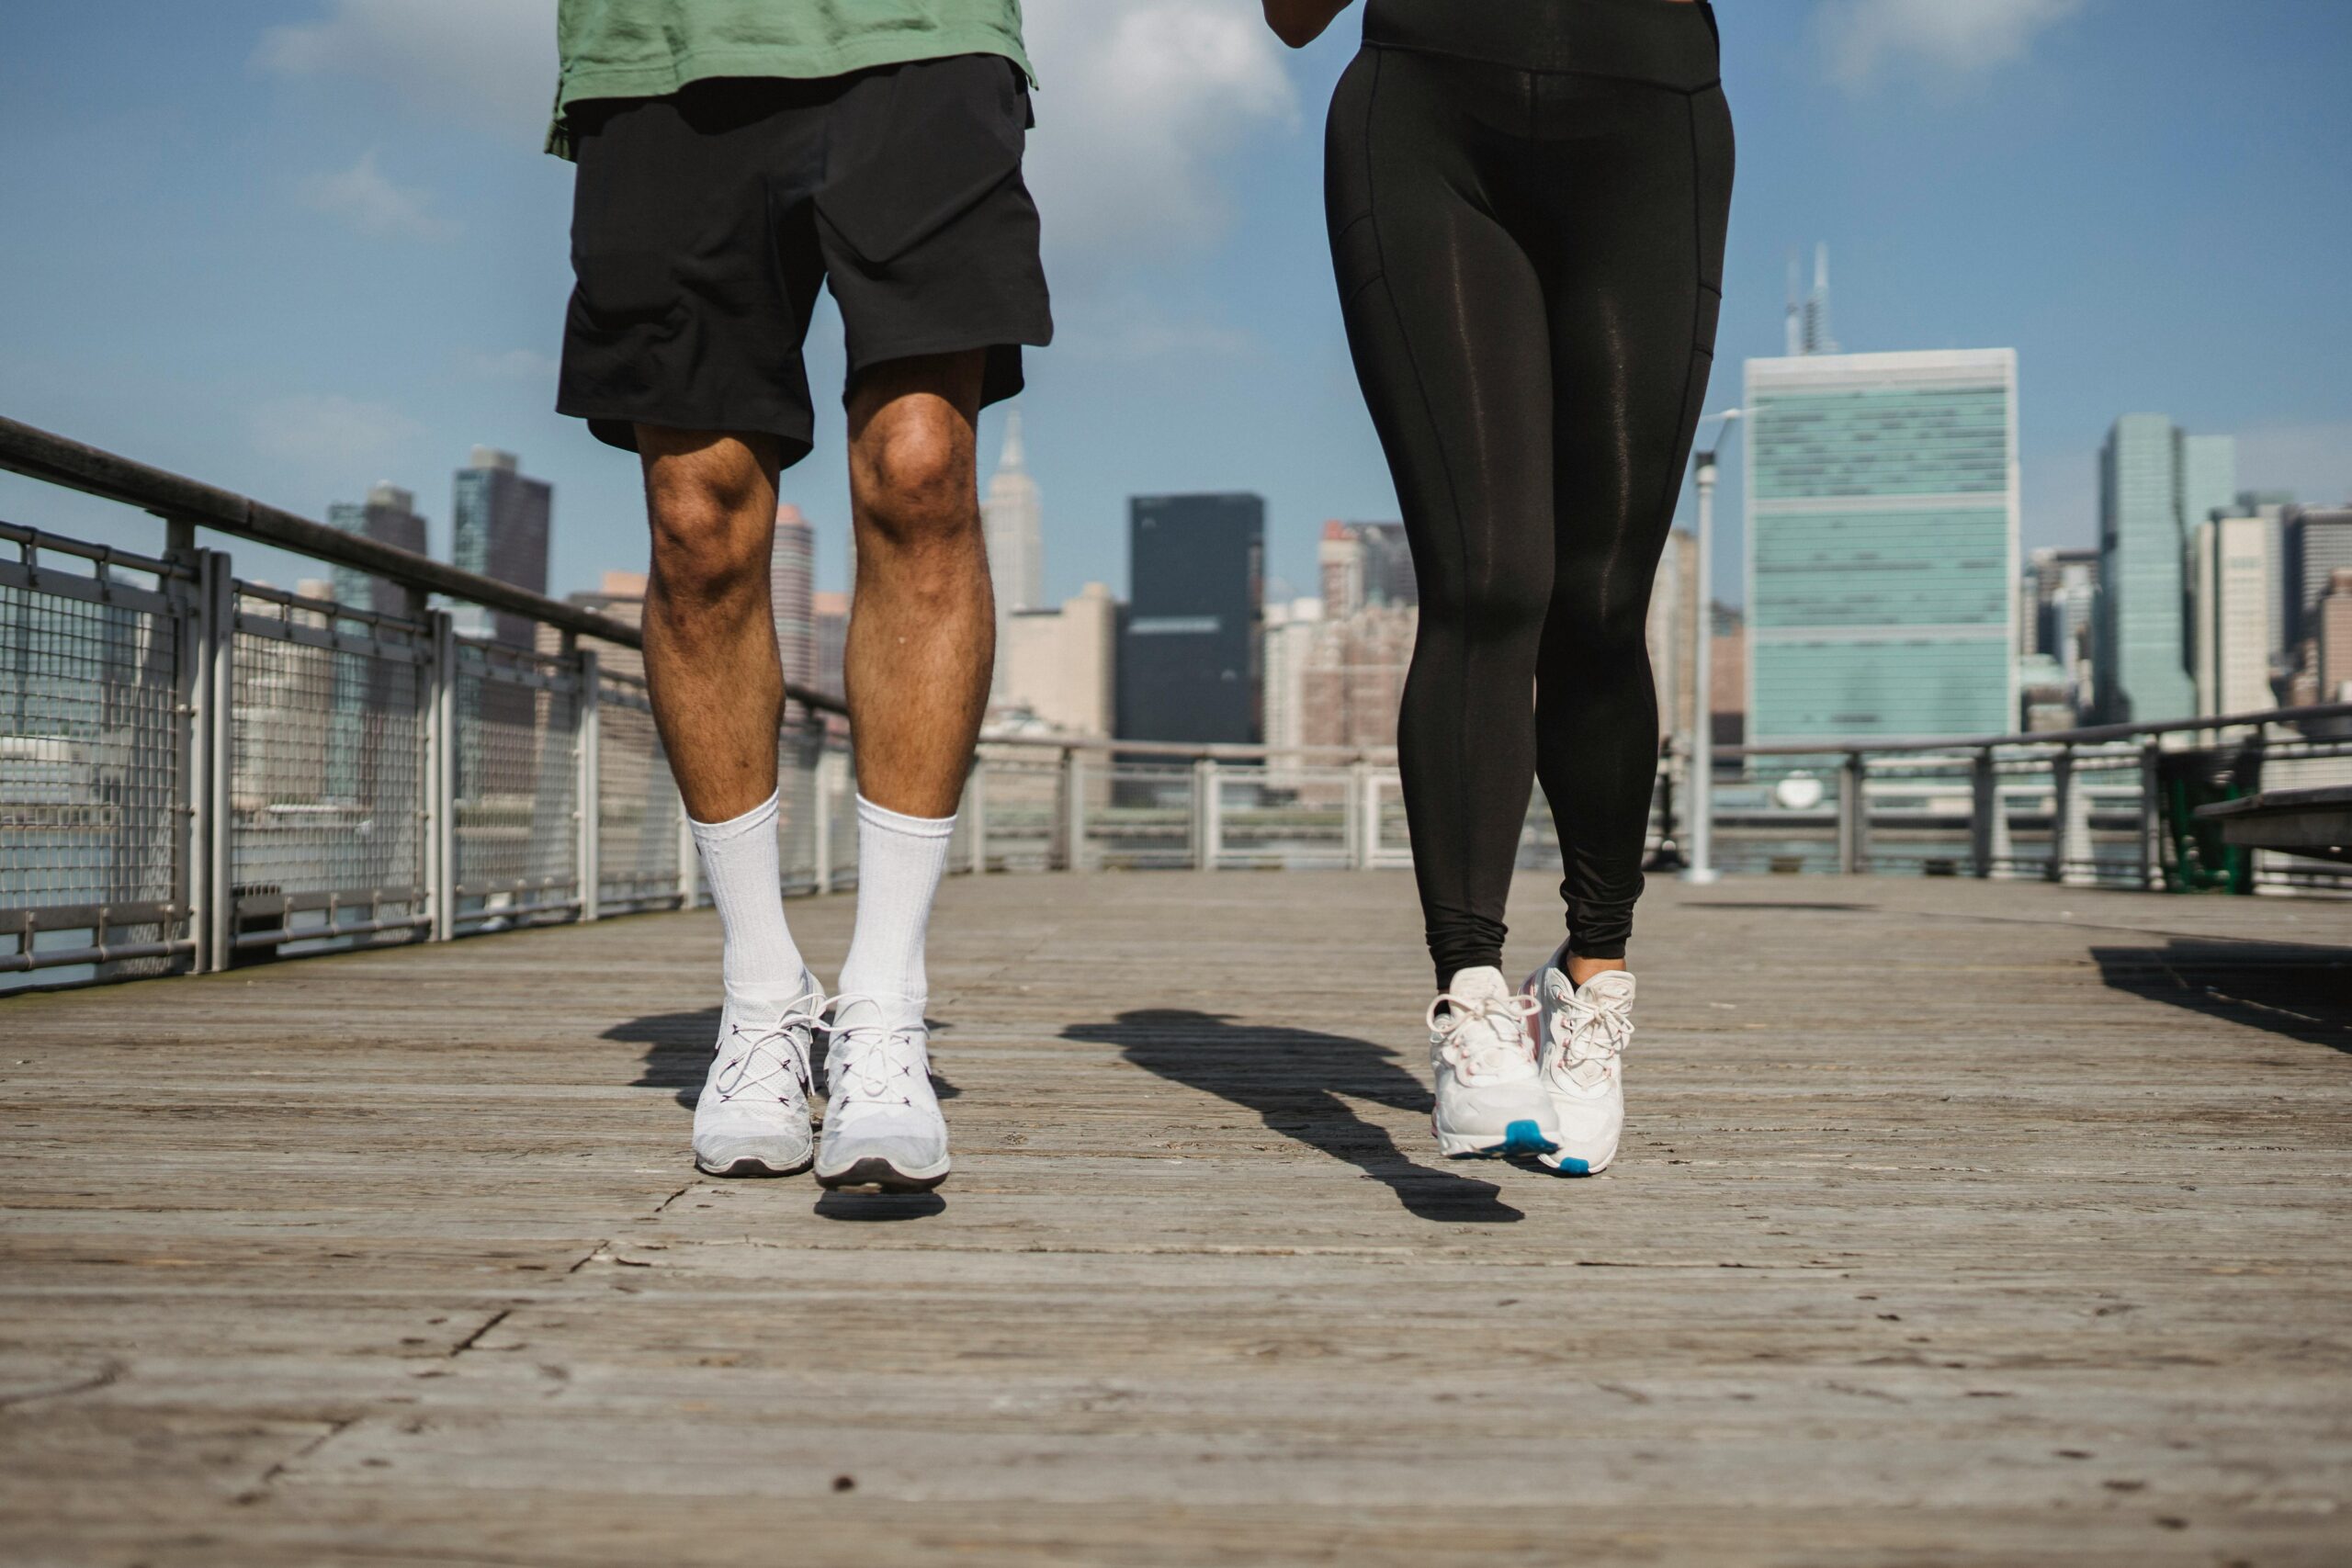 A man and woman are jogging on wooden decking side by side, photographed from the waist down